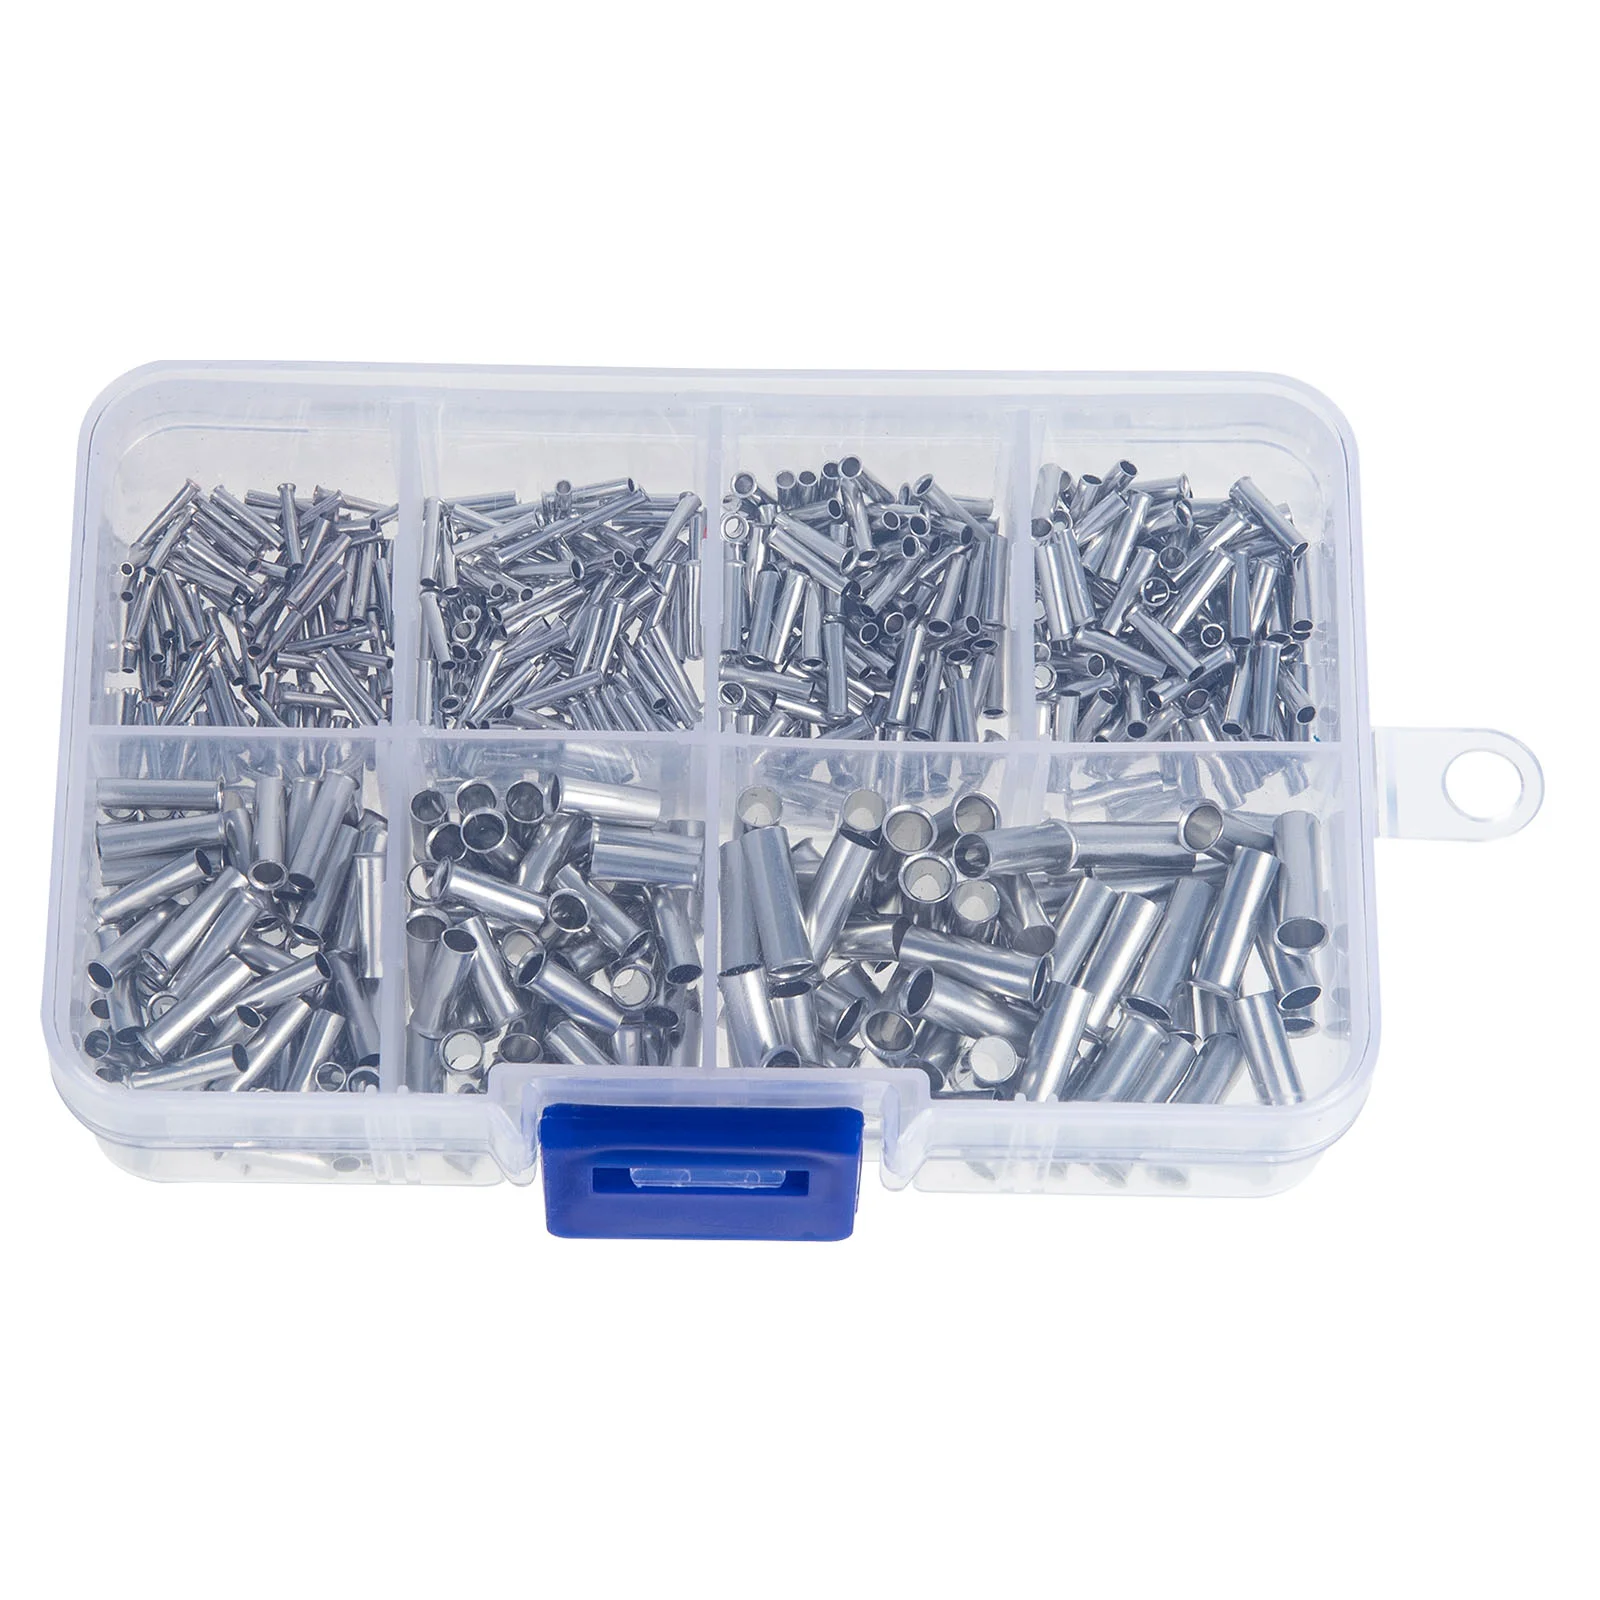 Metal Wire End Sleeve Ferrules Crimp Terminals Cable Ends Electric Crimping Kit Wiring Connectors Sleeves